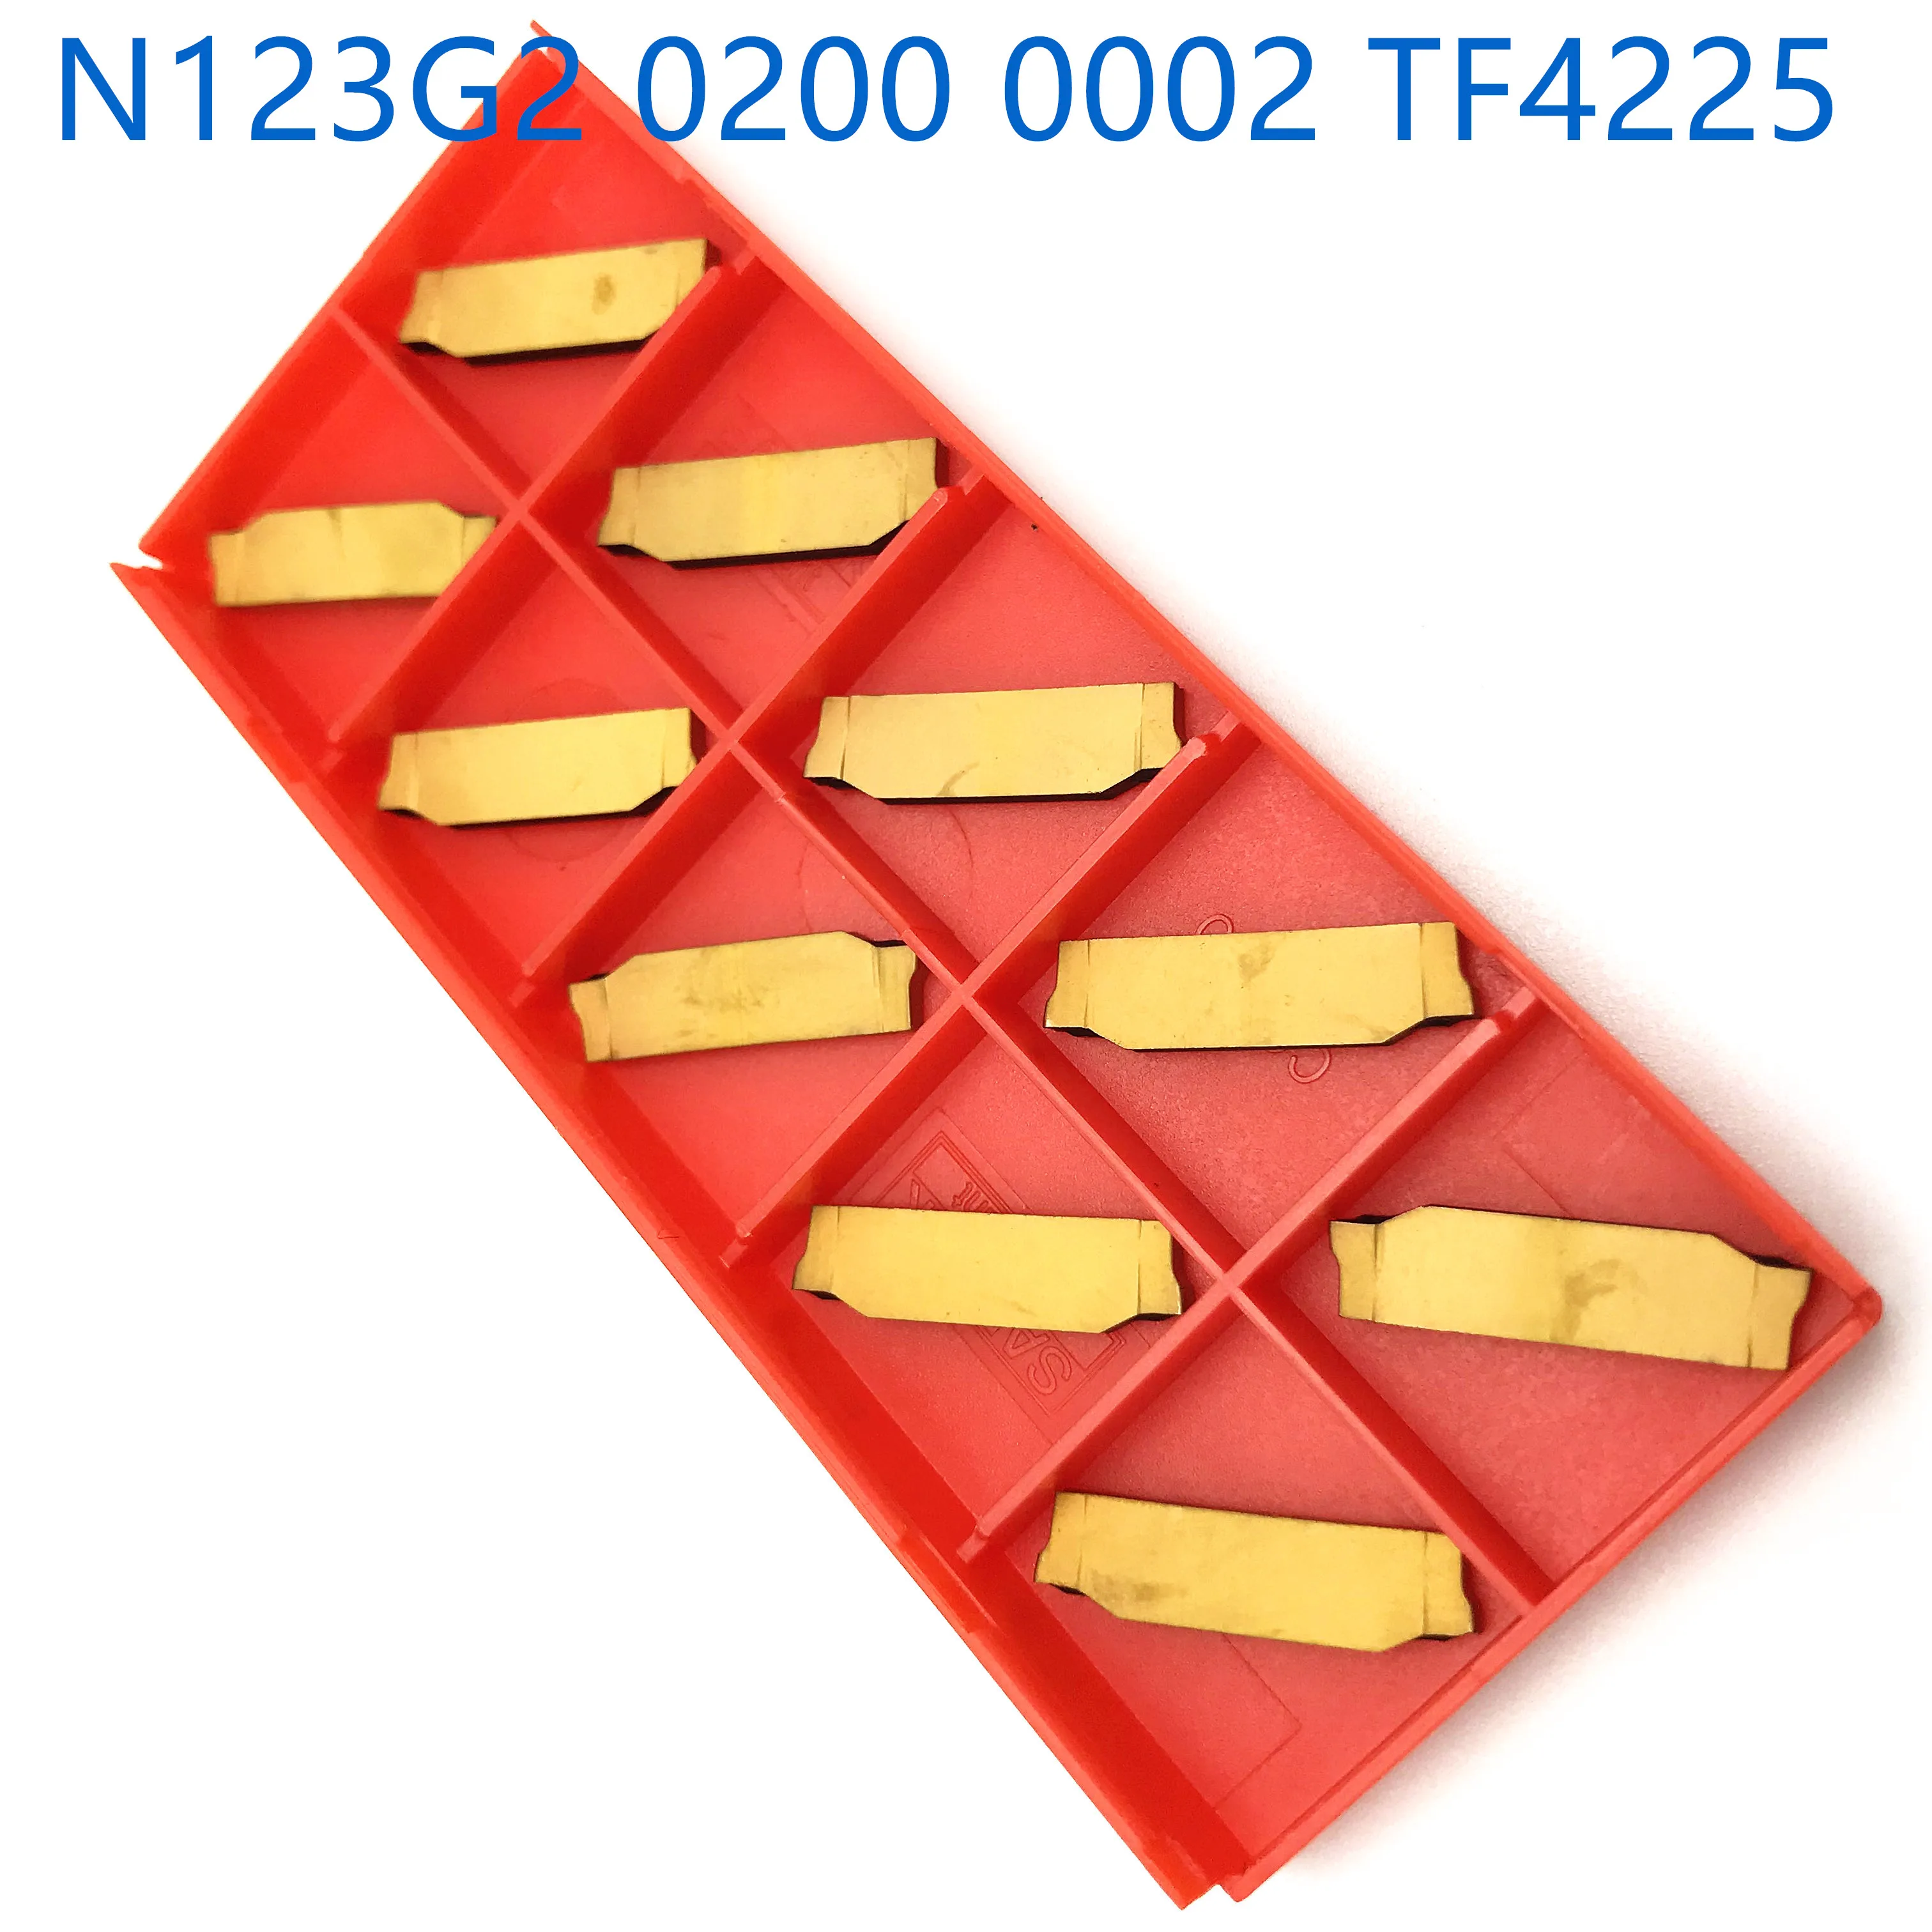 

N123G2-0200-0002-TF 4225 grooving carbide inserts N123G2 lathe cutter turning tool Parting and grooving tool